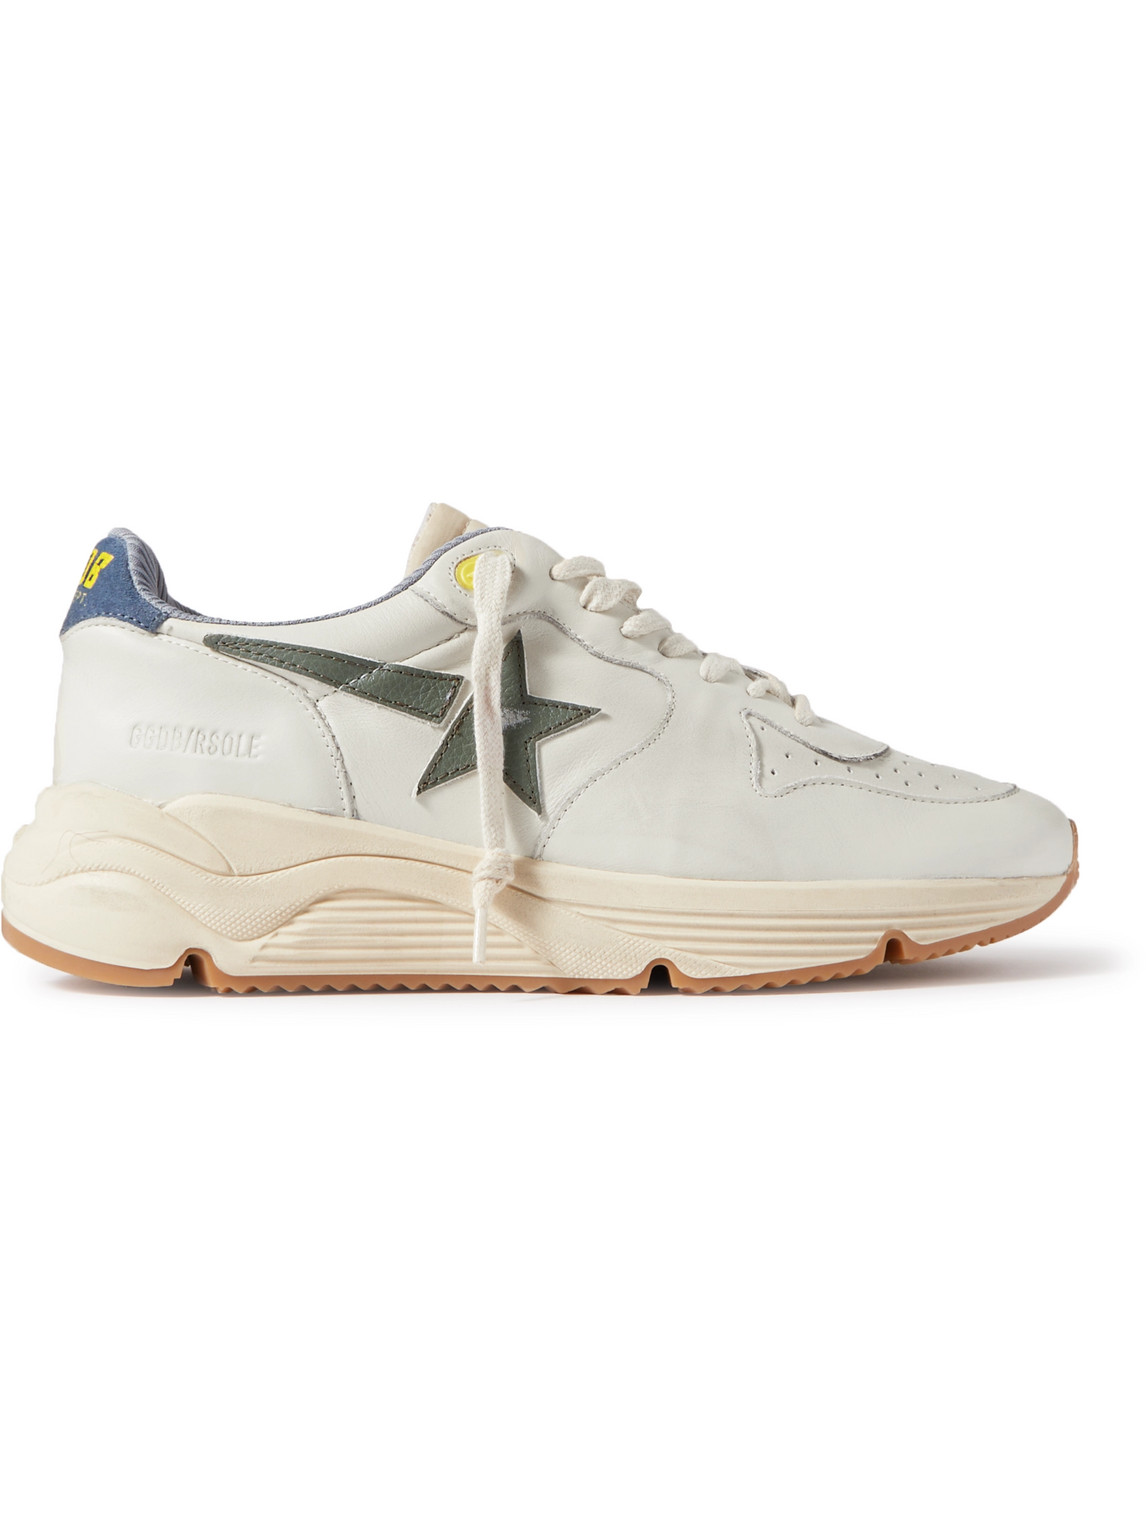 GOLDEN GOOSE RUNNING SOLE DISTRESSED LEATHER, NYLON AND SUEDE SNEAKERS